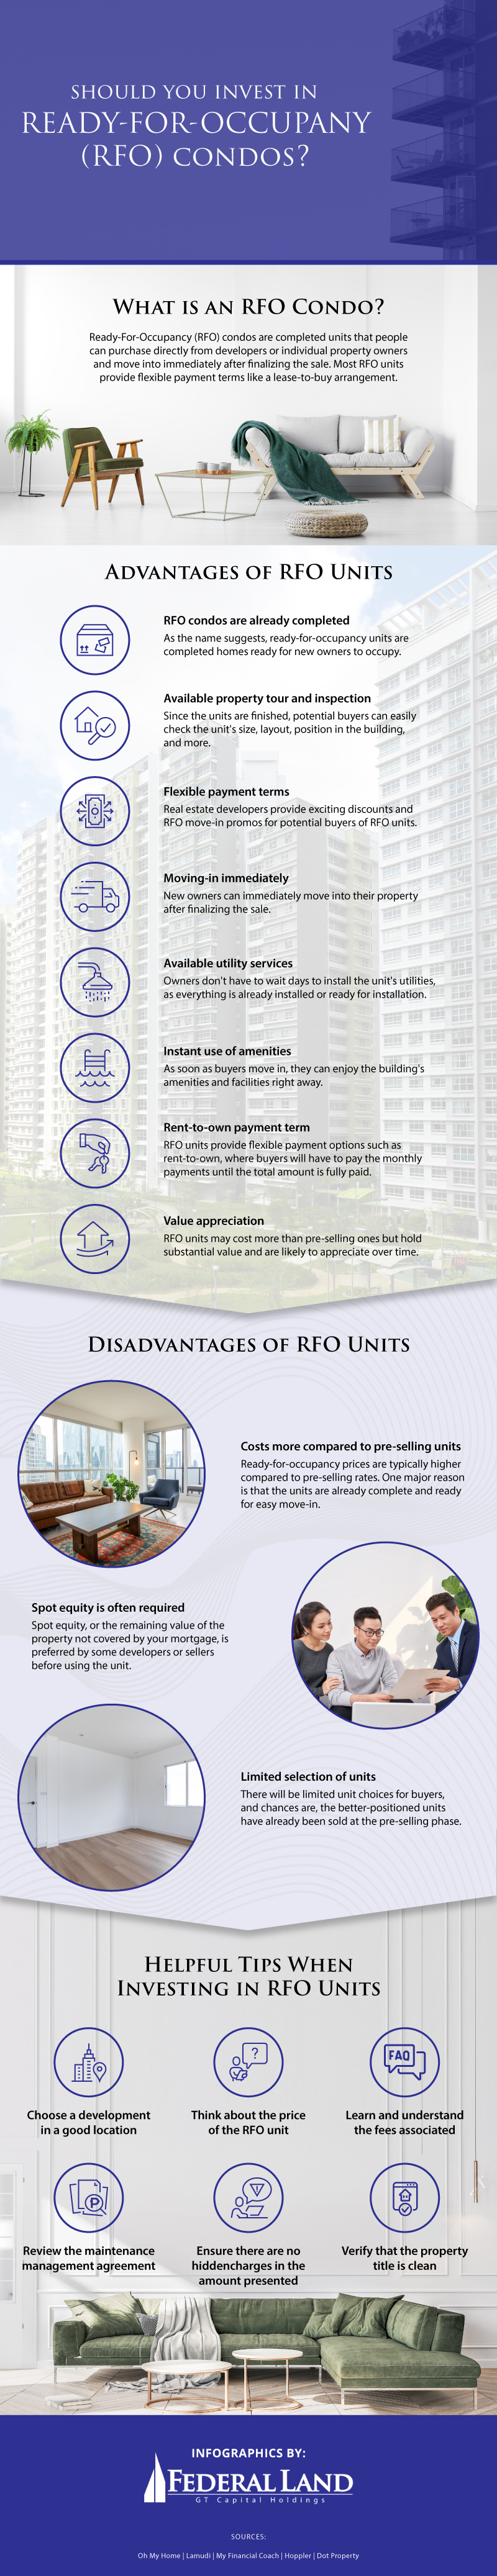 Should You Invest in Ready-For-Occupancy (RFO) Condos